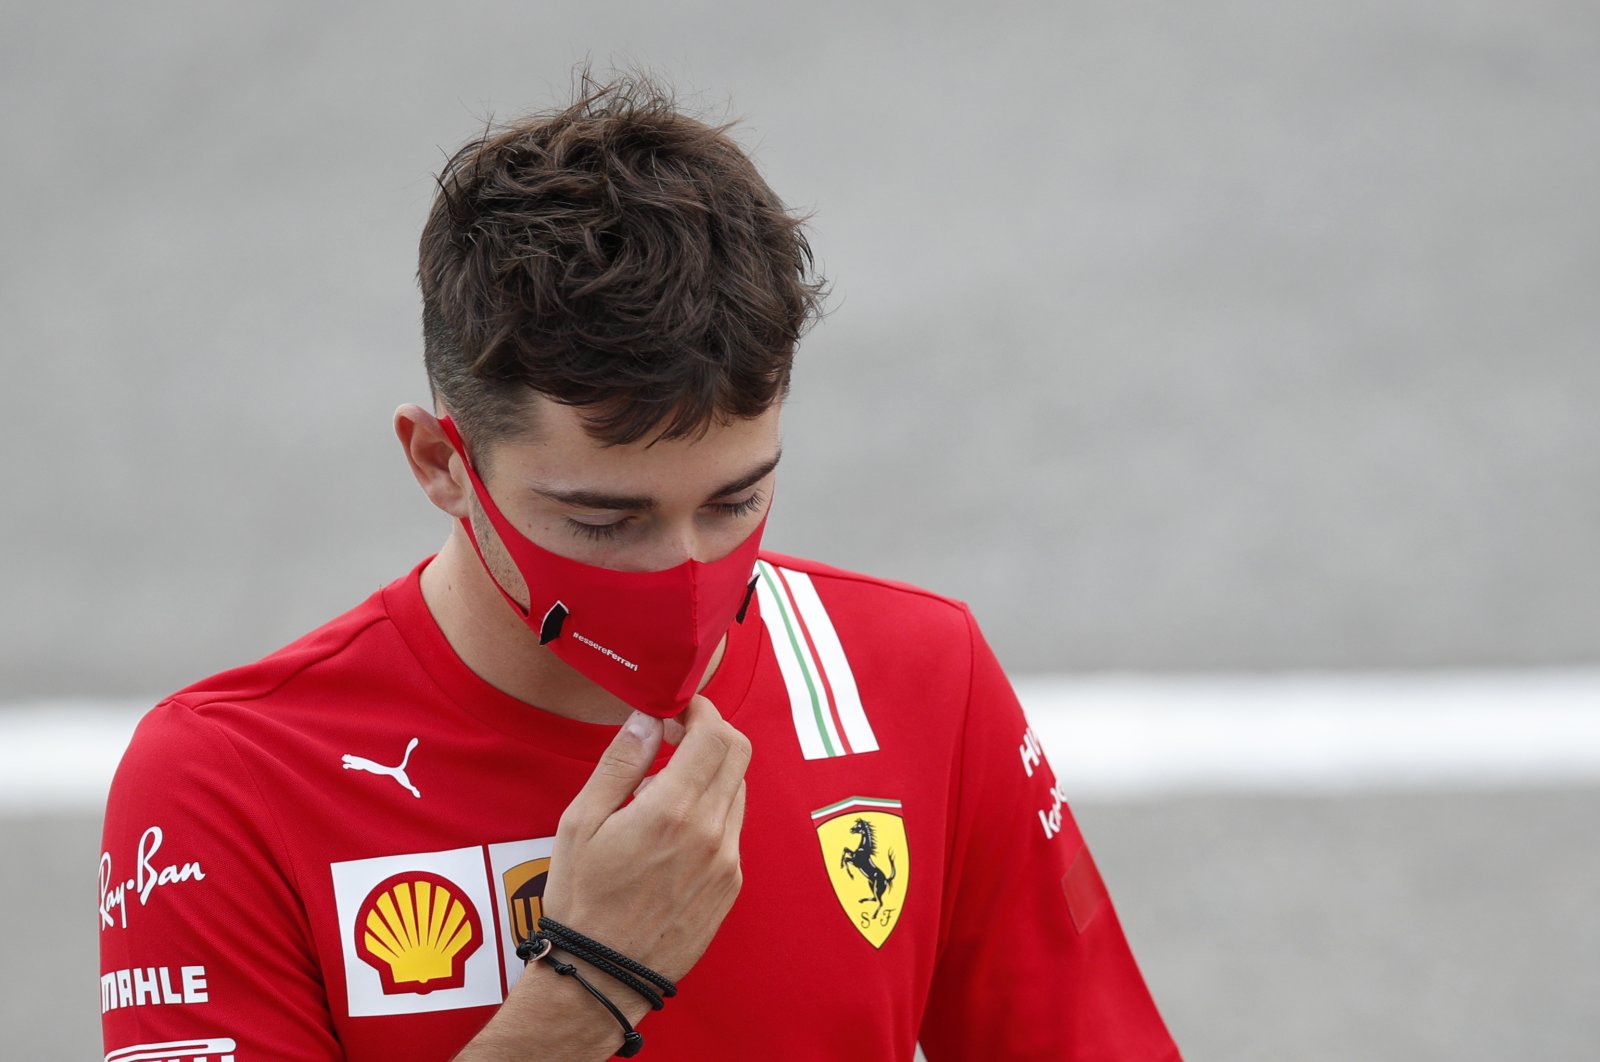 Ferrari driver Charles Leclerc before the practice session for the Formula 1 Spanish Grand Prix in Montmelo, Spain, Aug. 14, 2020. (AP Photo)